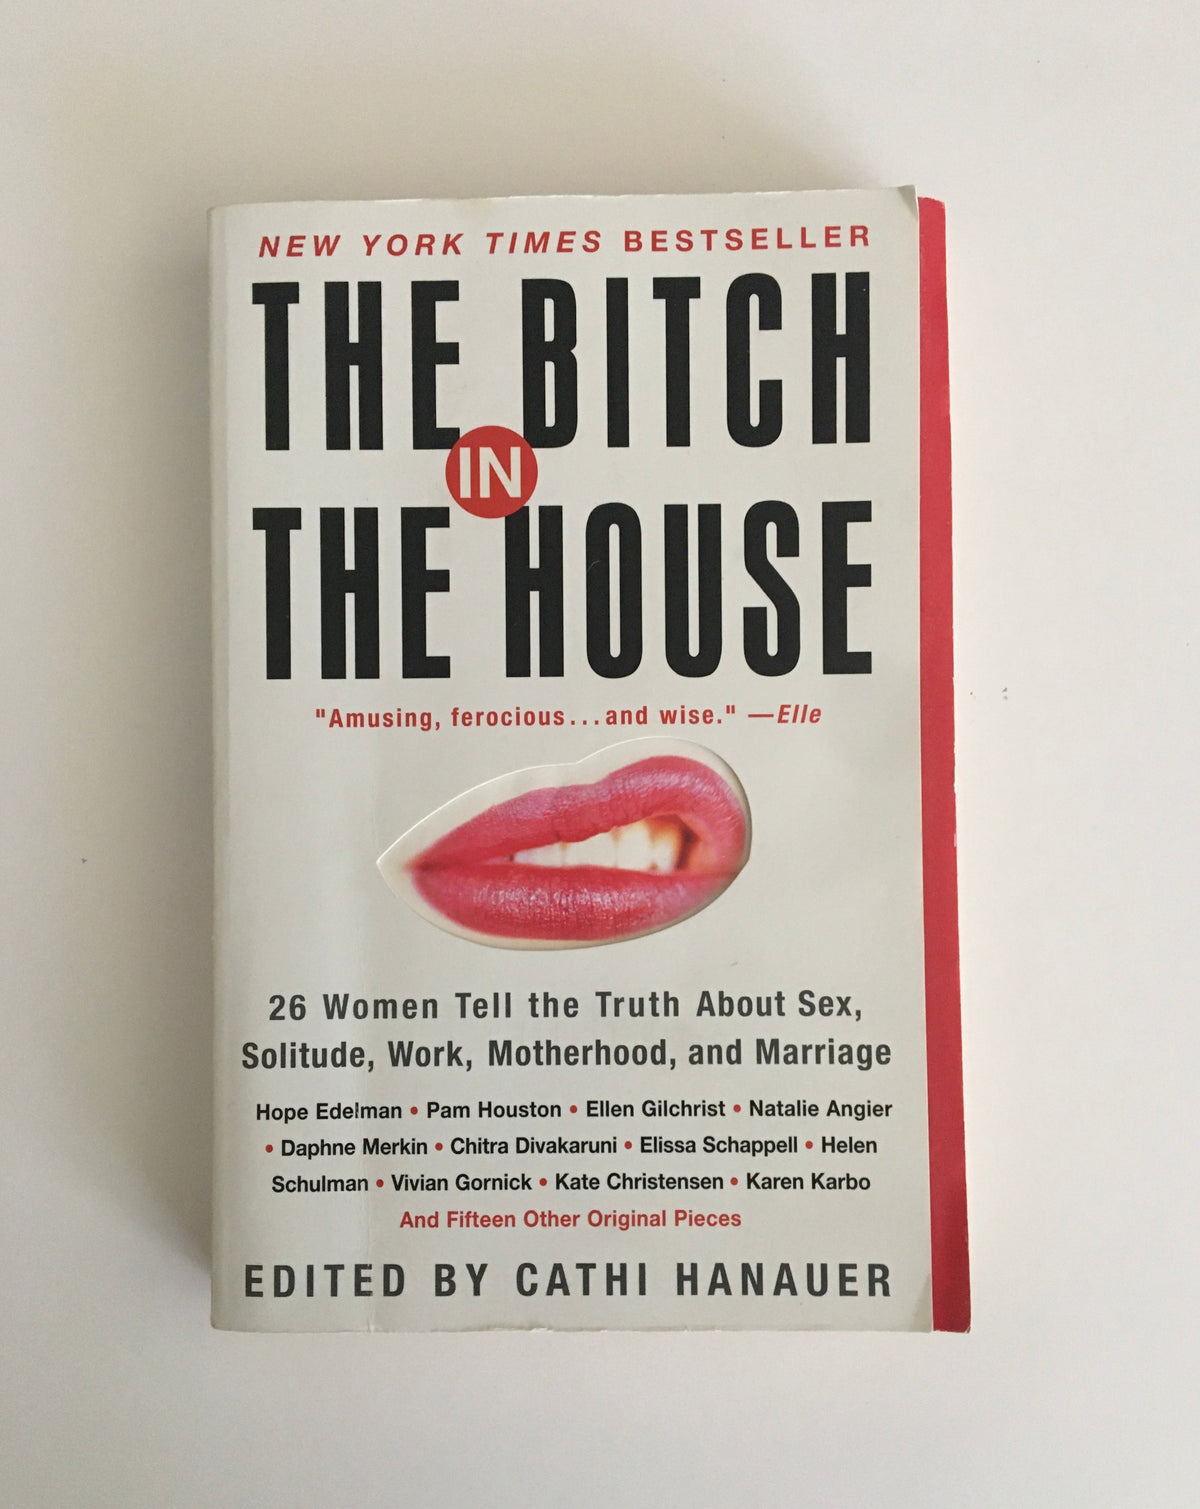 The Bitch in the House: 26 Women Tell the Truth about Sex, Solitude, Work, Motherhood, and Marriage edited by Cathi Hanauer